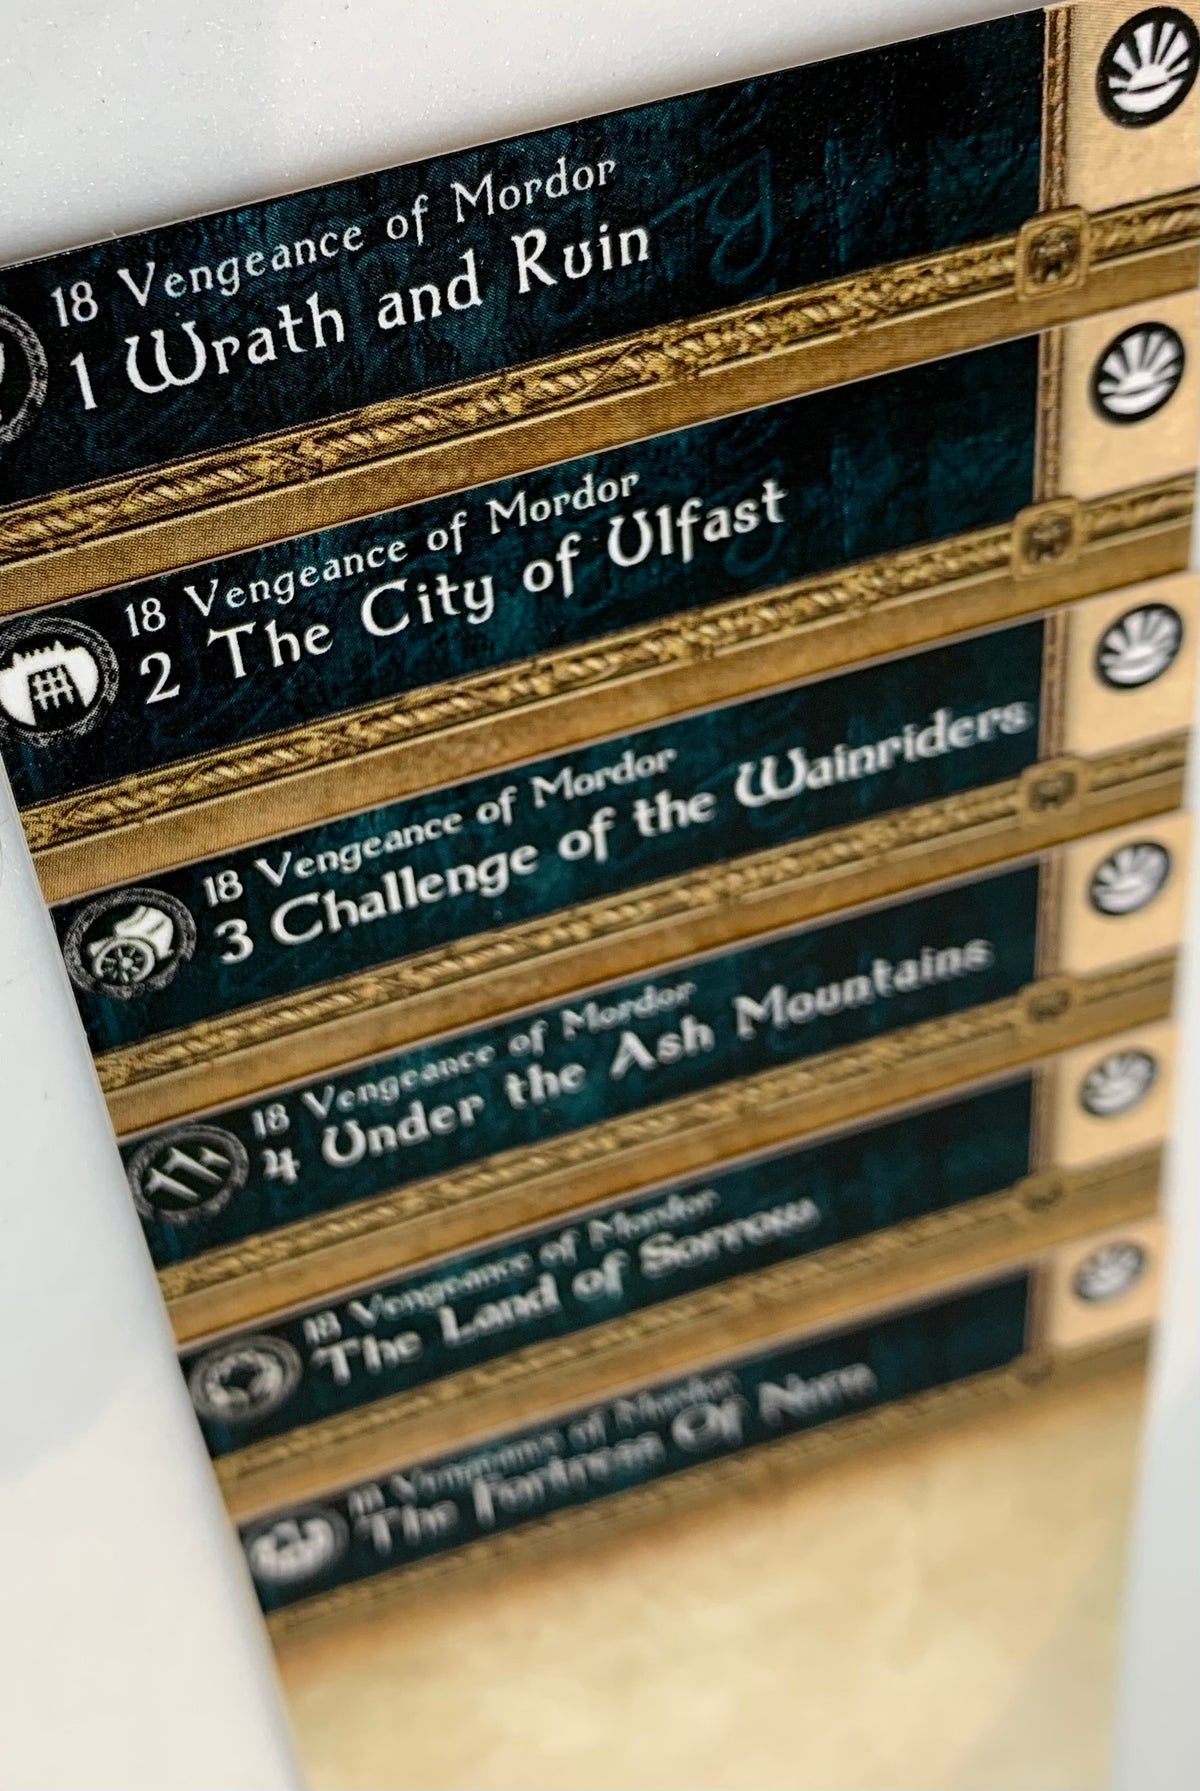 Vengeance Of Mordor - The Lord of the Rings: LCG Deck Box Dividers